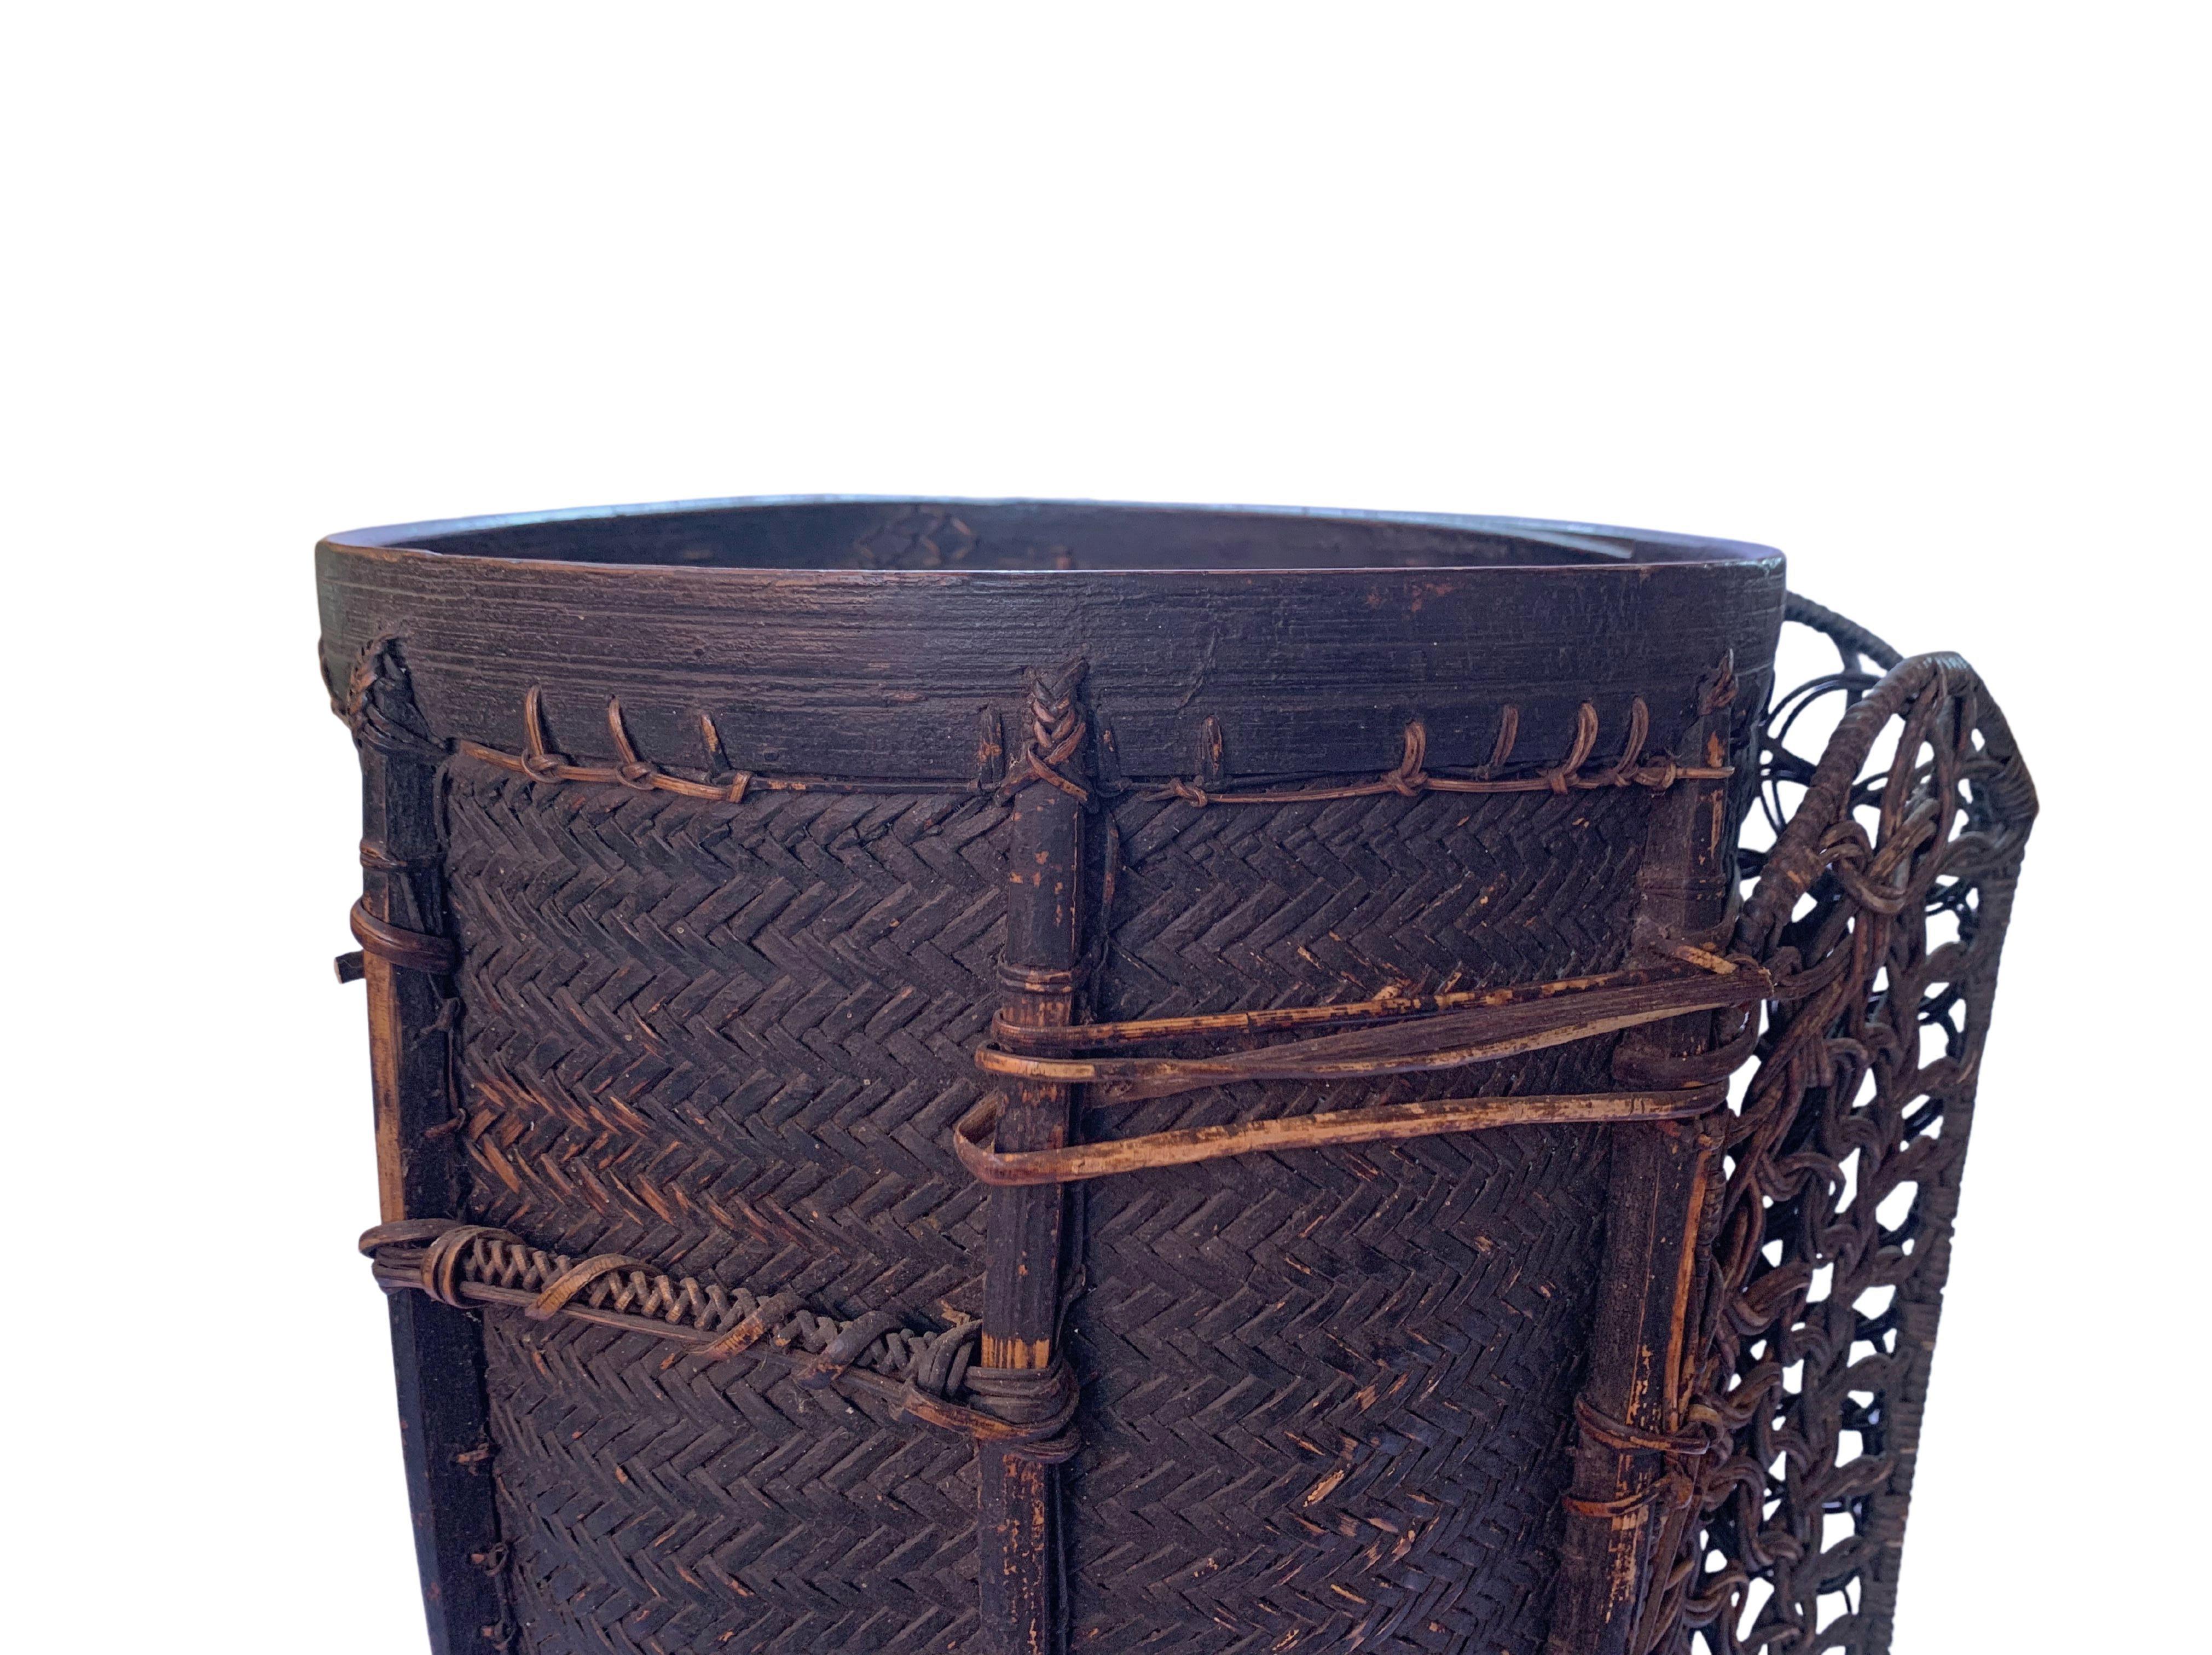 Vintage Rattan Basket Dayak Tribe Hand-Woven from Kalimantan, Borneo For Sale 1